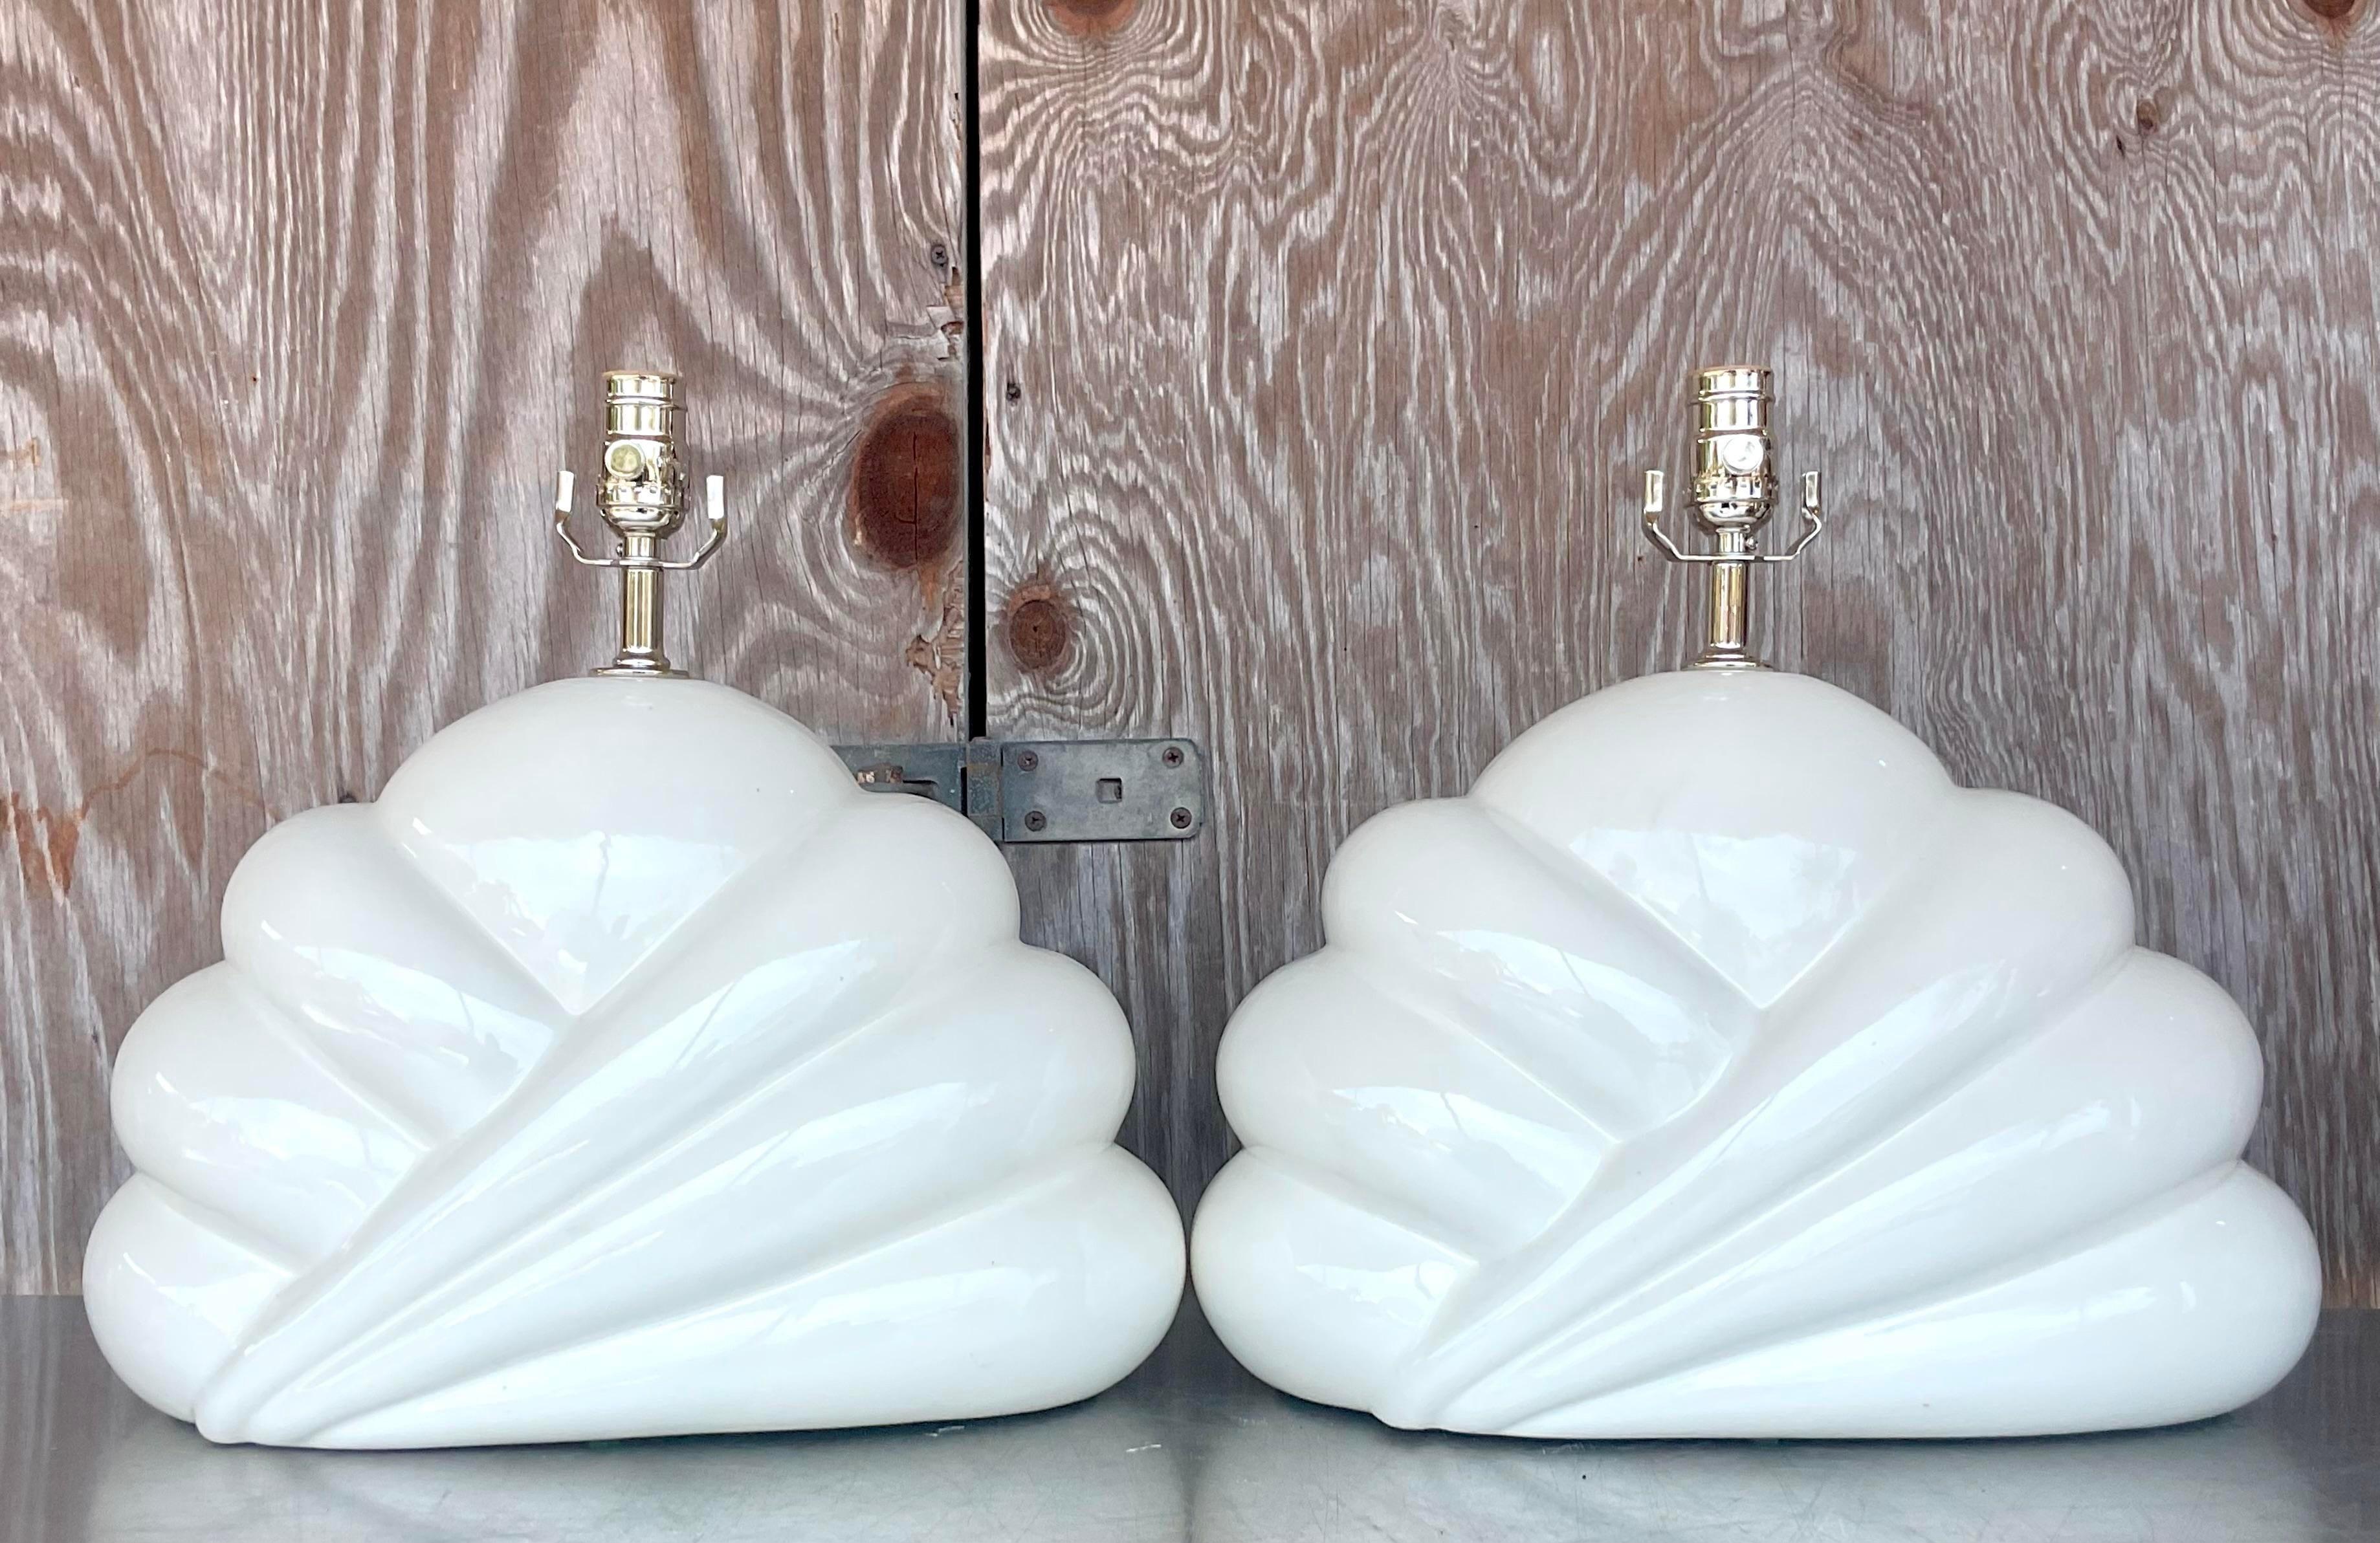 A fabulous pair of vintage Boho table lamps. A glazed ceramic finish in a great cloud design. Fully restored with all new wiring and hardware. Acquired from a Palm Beach estate.